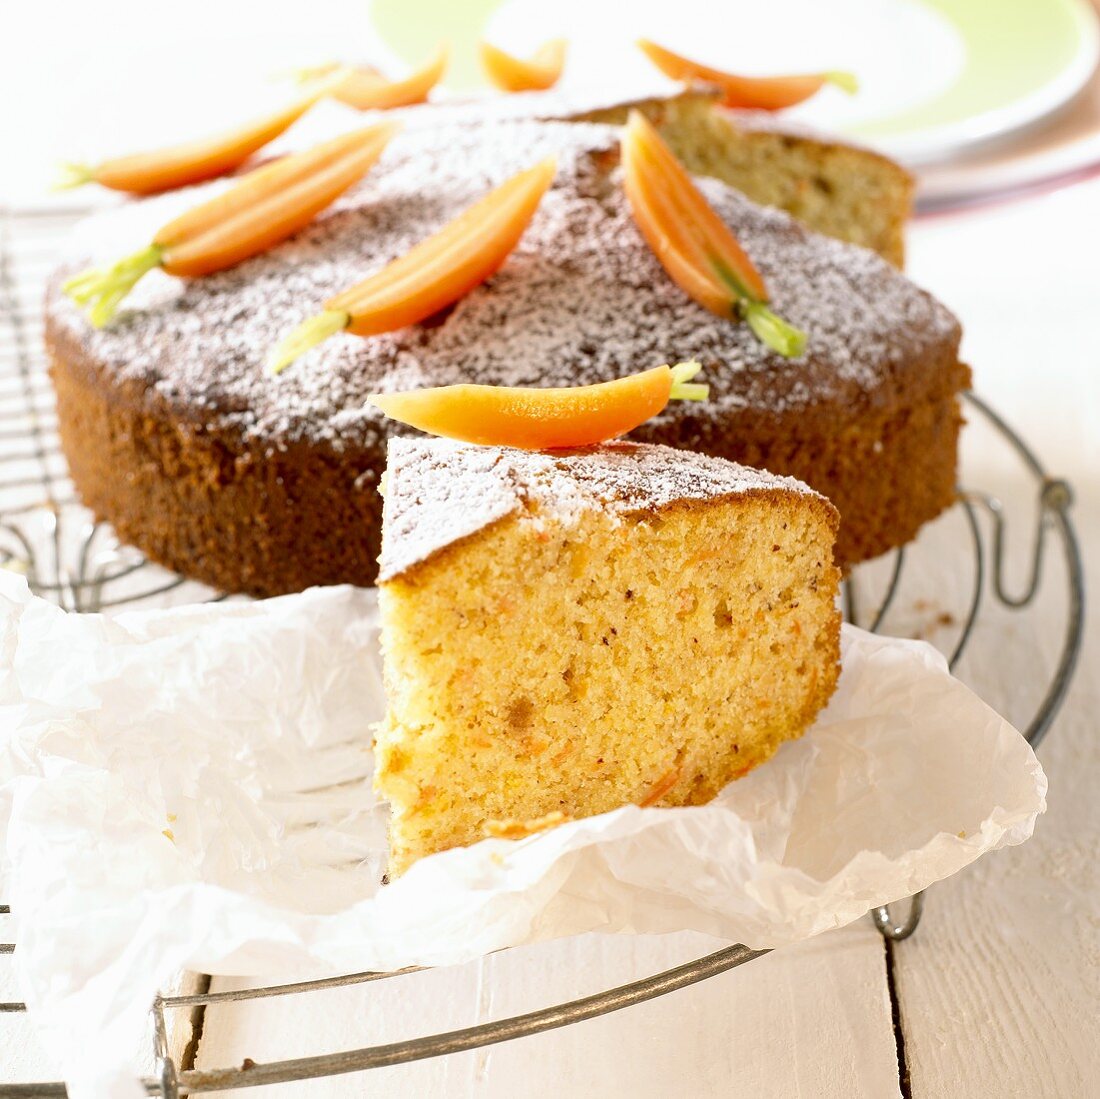 Carrot cake decorated with fresh carrots